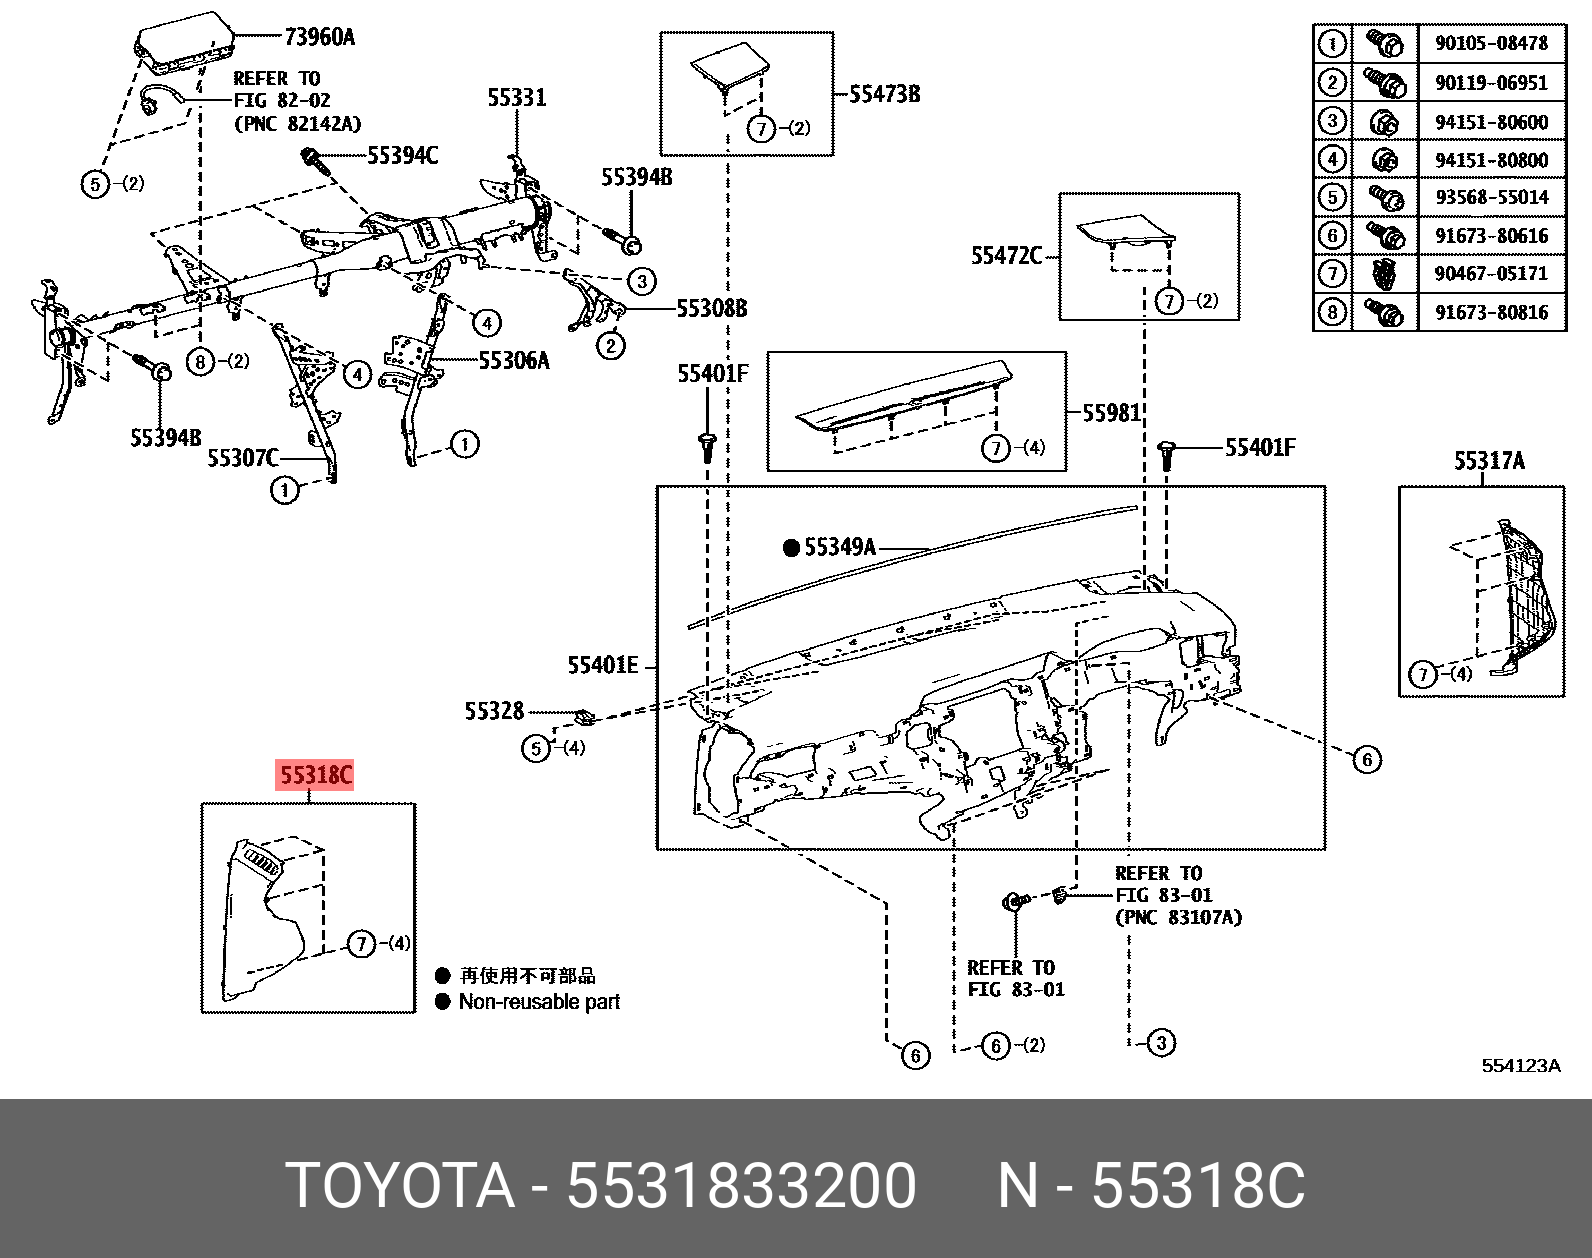 CAMRY 201706-, PANEL, INSTRUMENT SIDE, LH